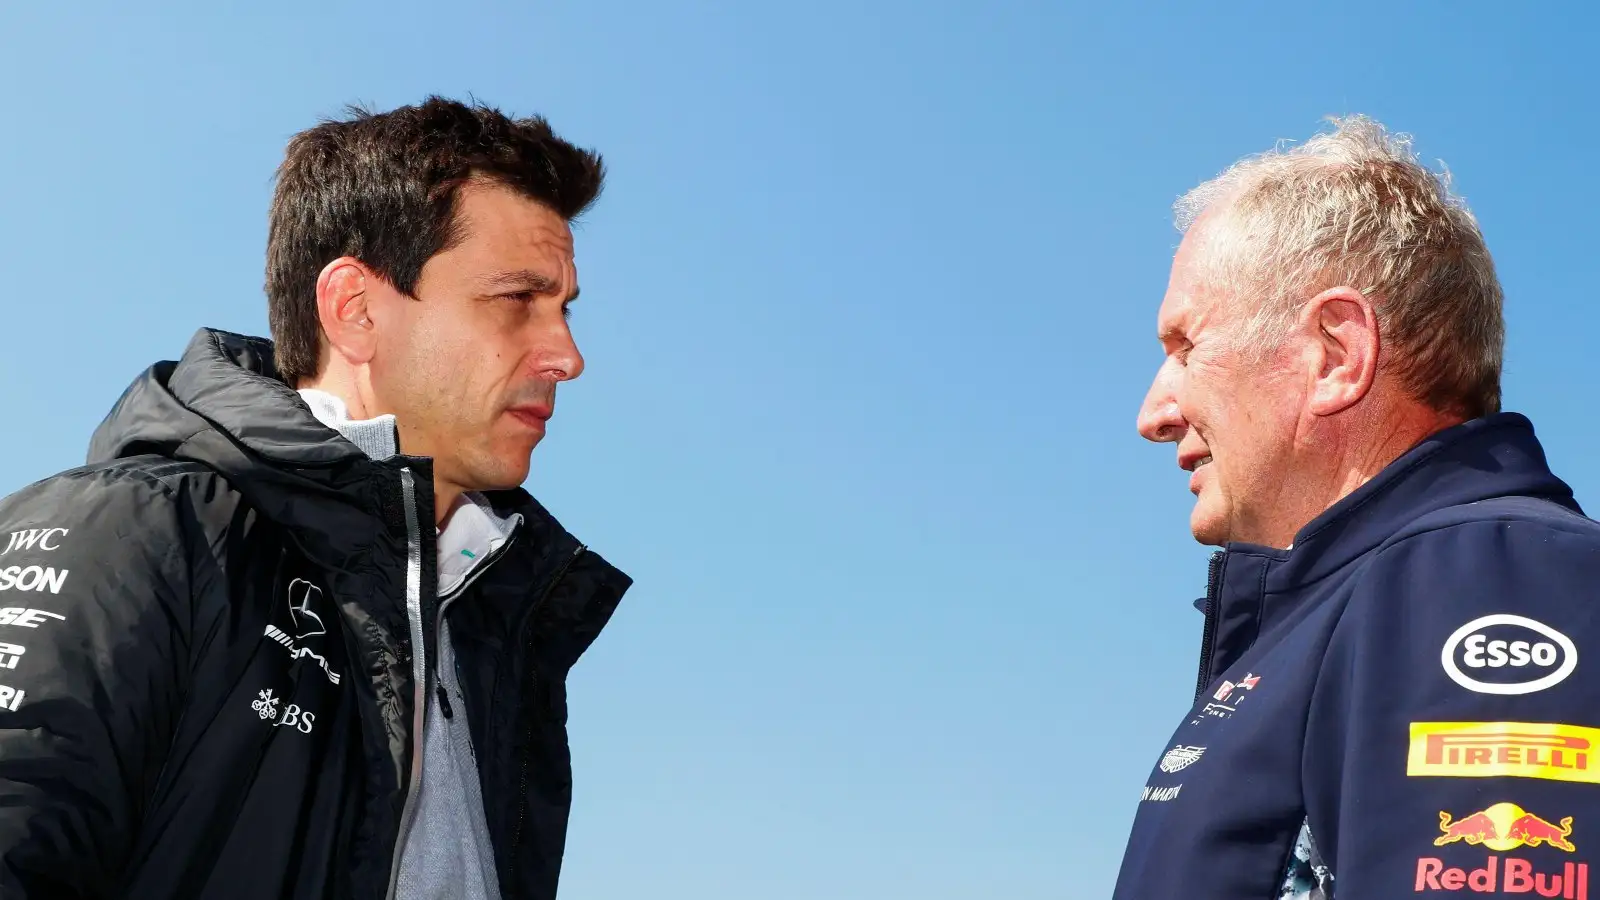 Toto Wolff looks at Helmut Marko. Mexico, October 2017.